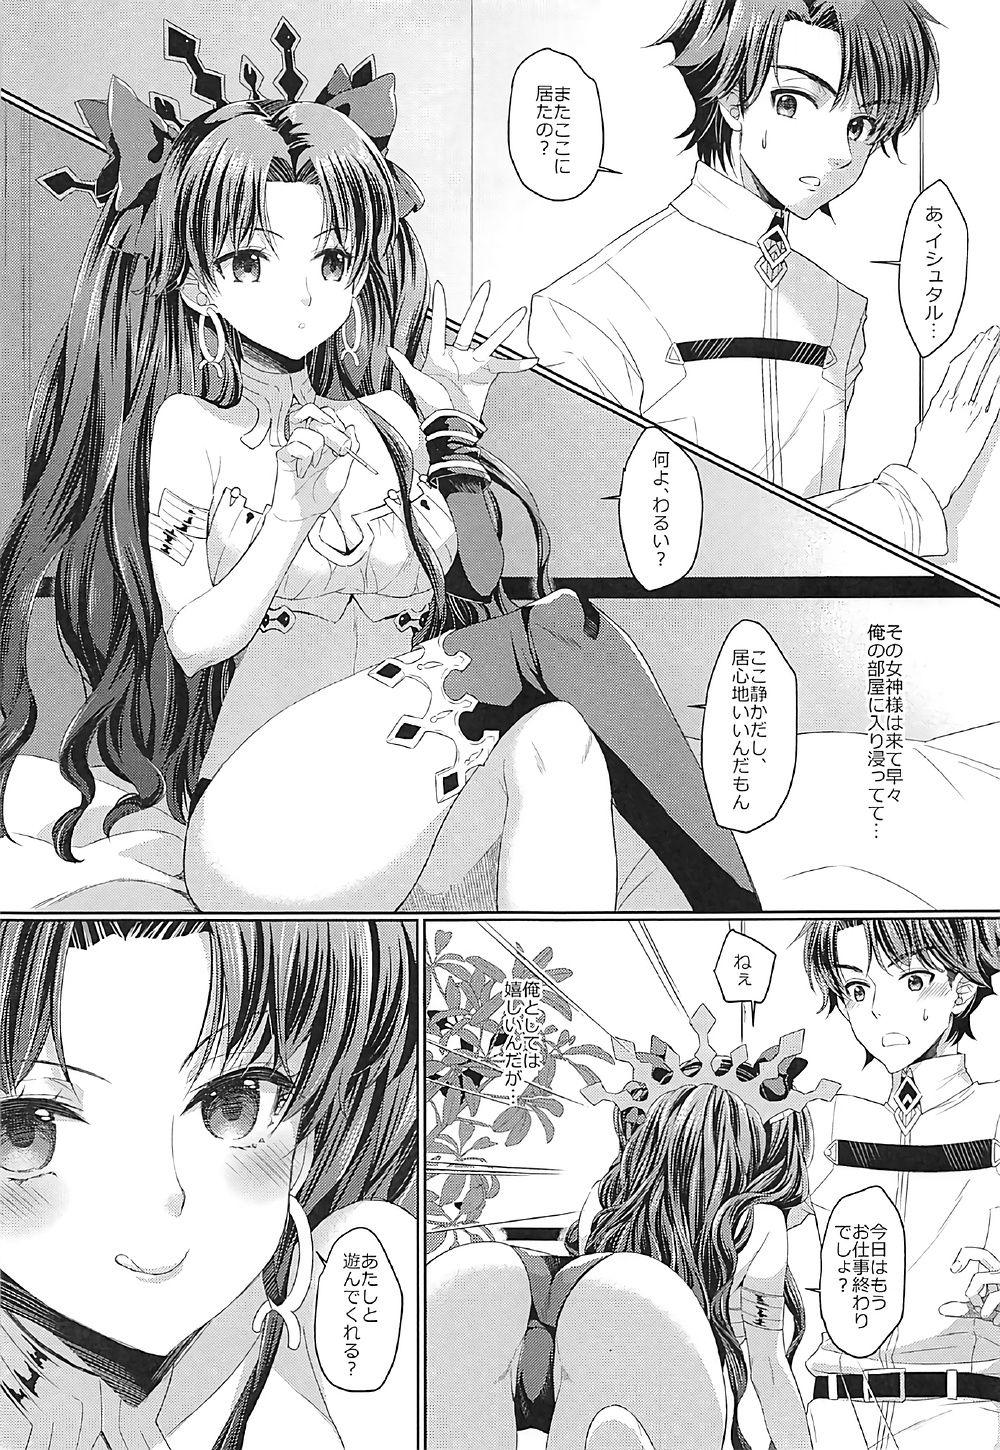 Gay Public Boku no Megami-sama & C.C. Collection 2017 Summer - Fate grand order Chastity - Page 6